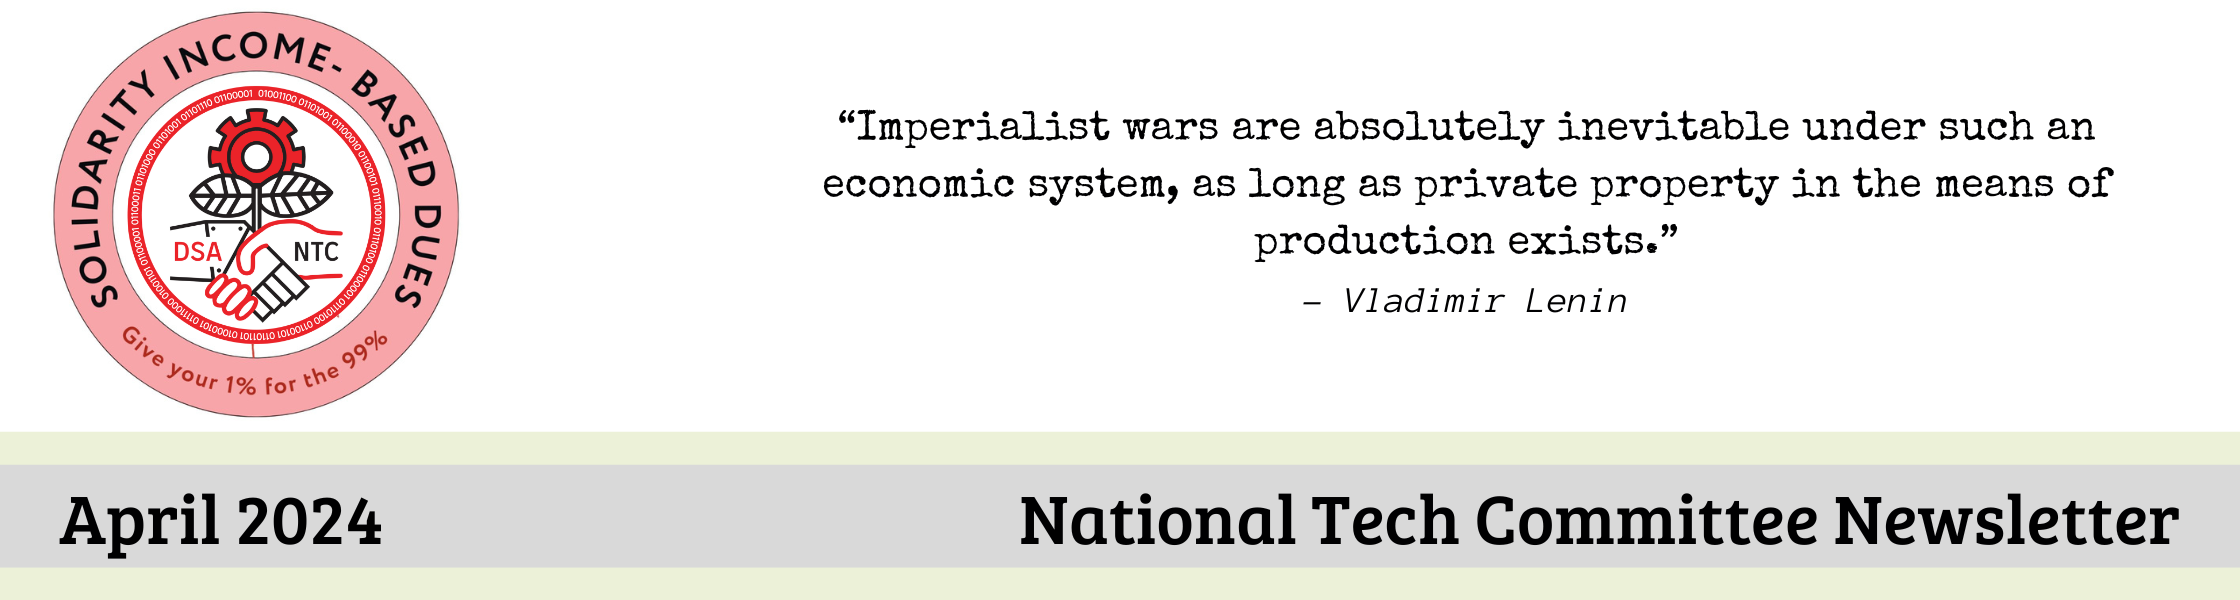 “Imperialist wars are absolutely inevitable under such an economic system, as long as private property in the means of production exists.” 
- Vladimir Lenin